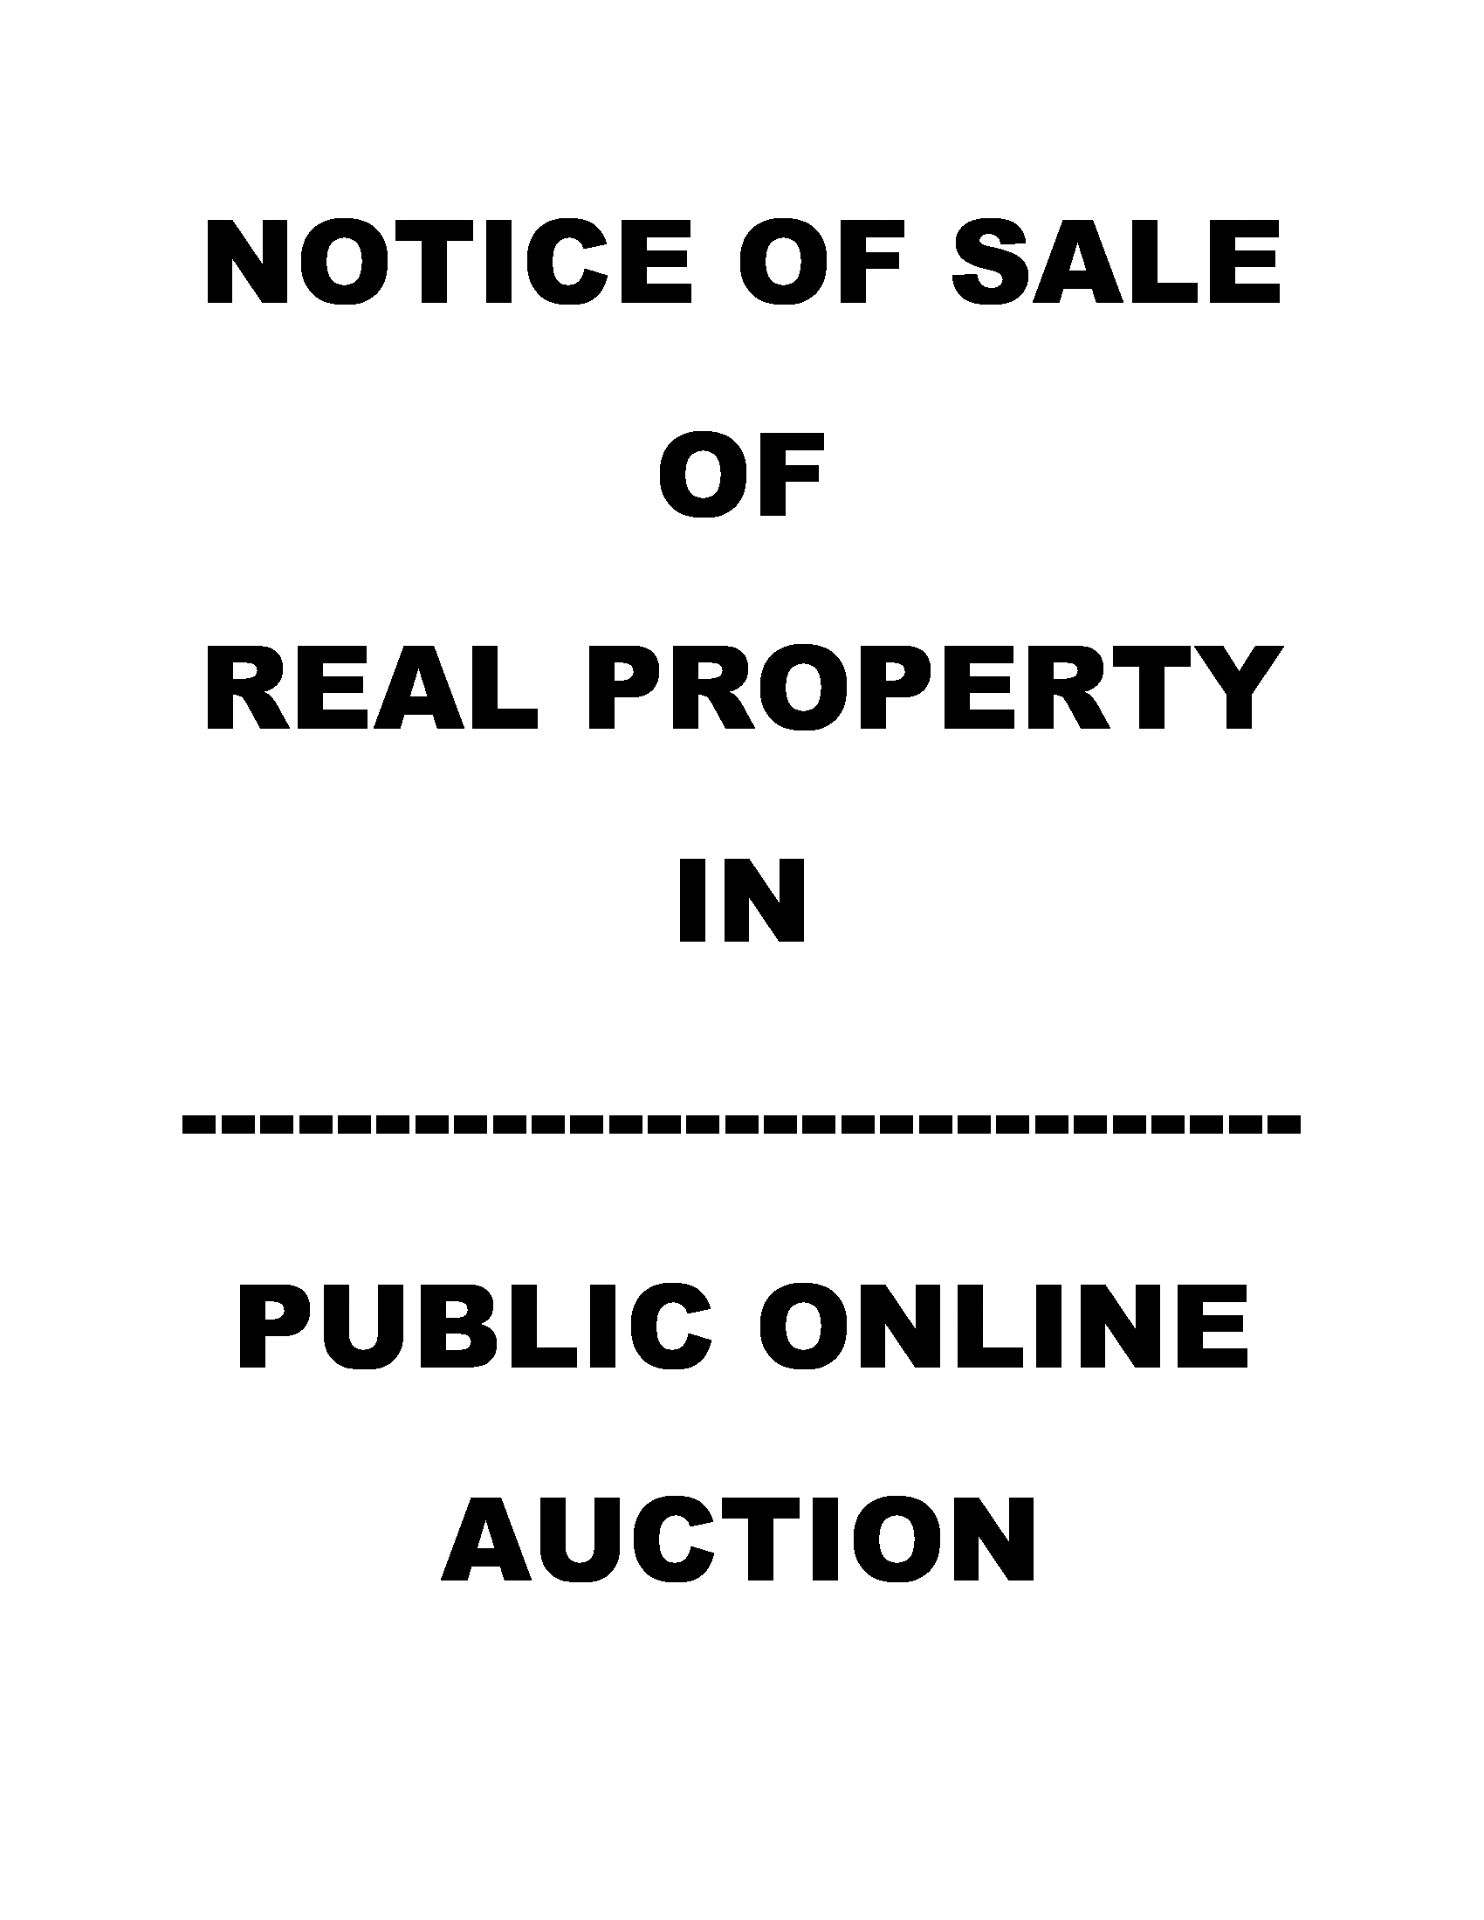 NOTICE OF SALE OF REAL PROPERTY (Located In Rice Lake, Wi. See Description) IN PUBLIC ONLINE AUCTION - Image 2 of 4